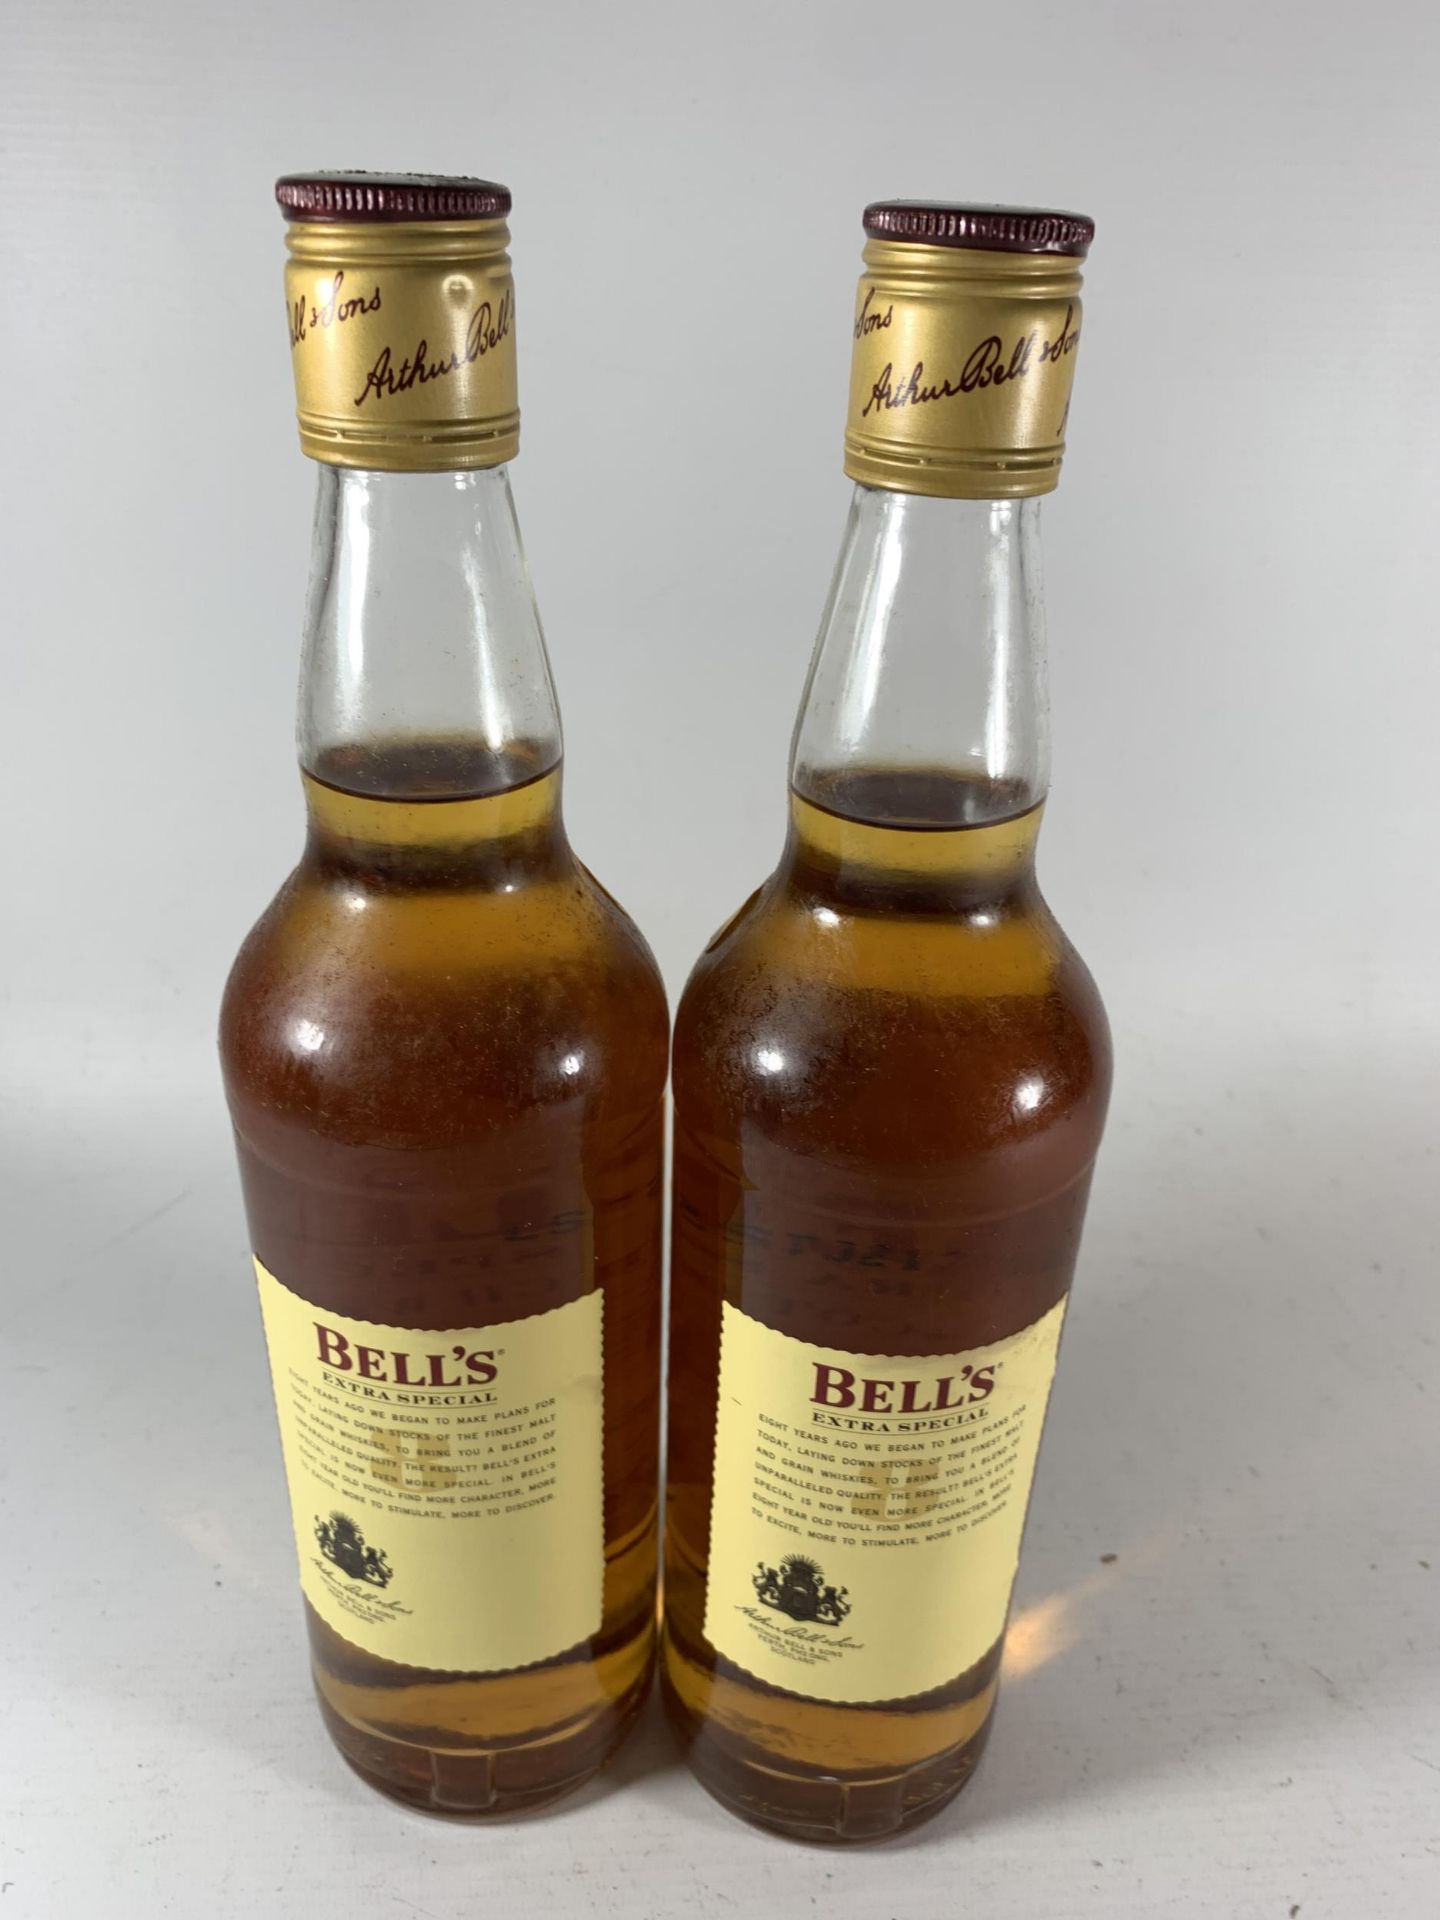 2 X 70CL BOTTLE - BELL'S EXTRA SPECIAL AGED 8 YEARS OLD SCOTCH WHISKY - Image 3 of 3